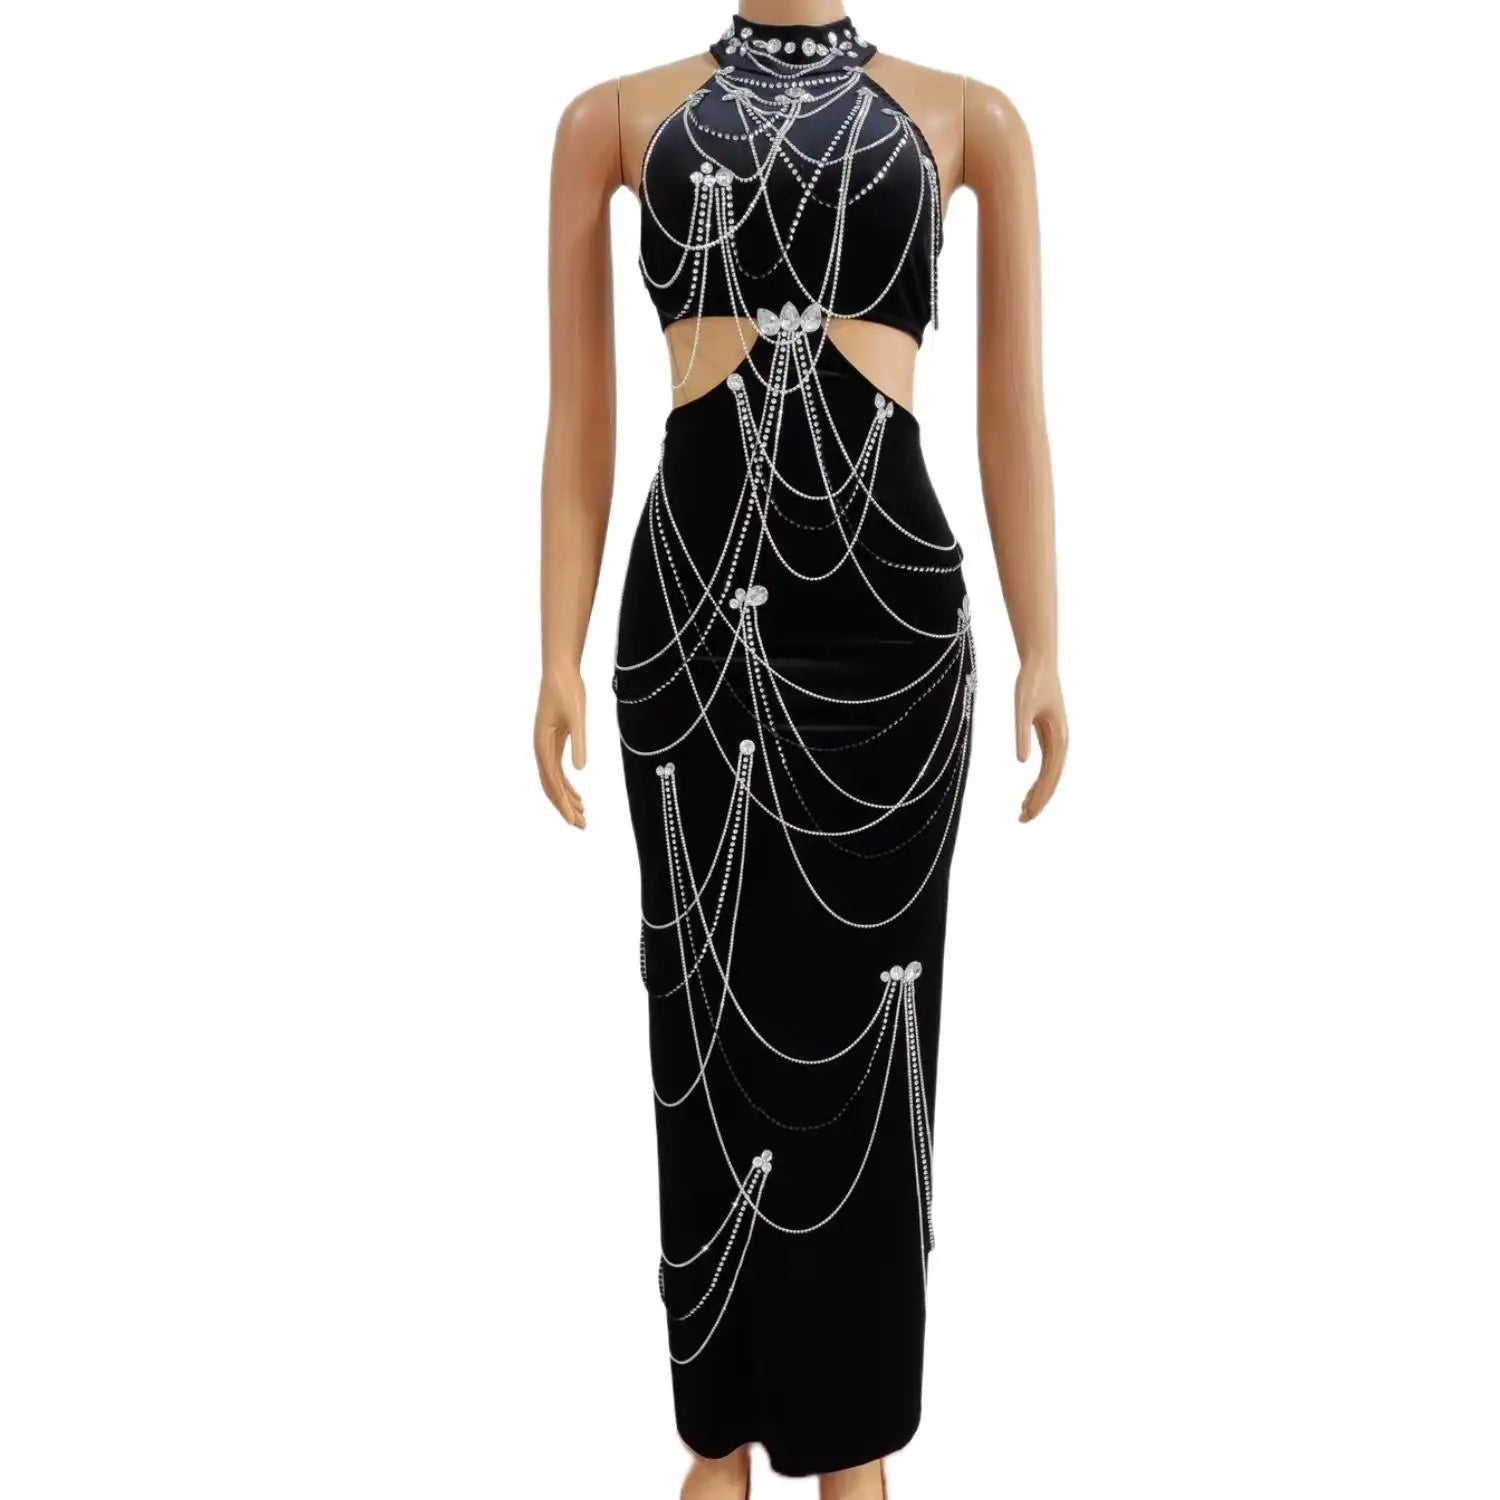 Long Prom Dresses Sexy Black Cut-out Style Luxury Diamond Chain Dresses Black Girl Prom Party Formal Gowns